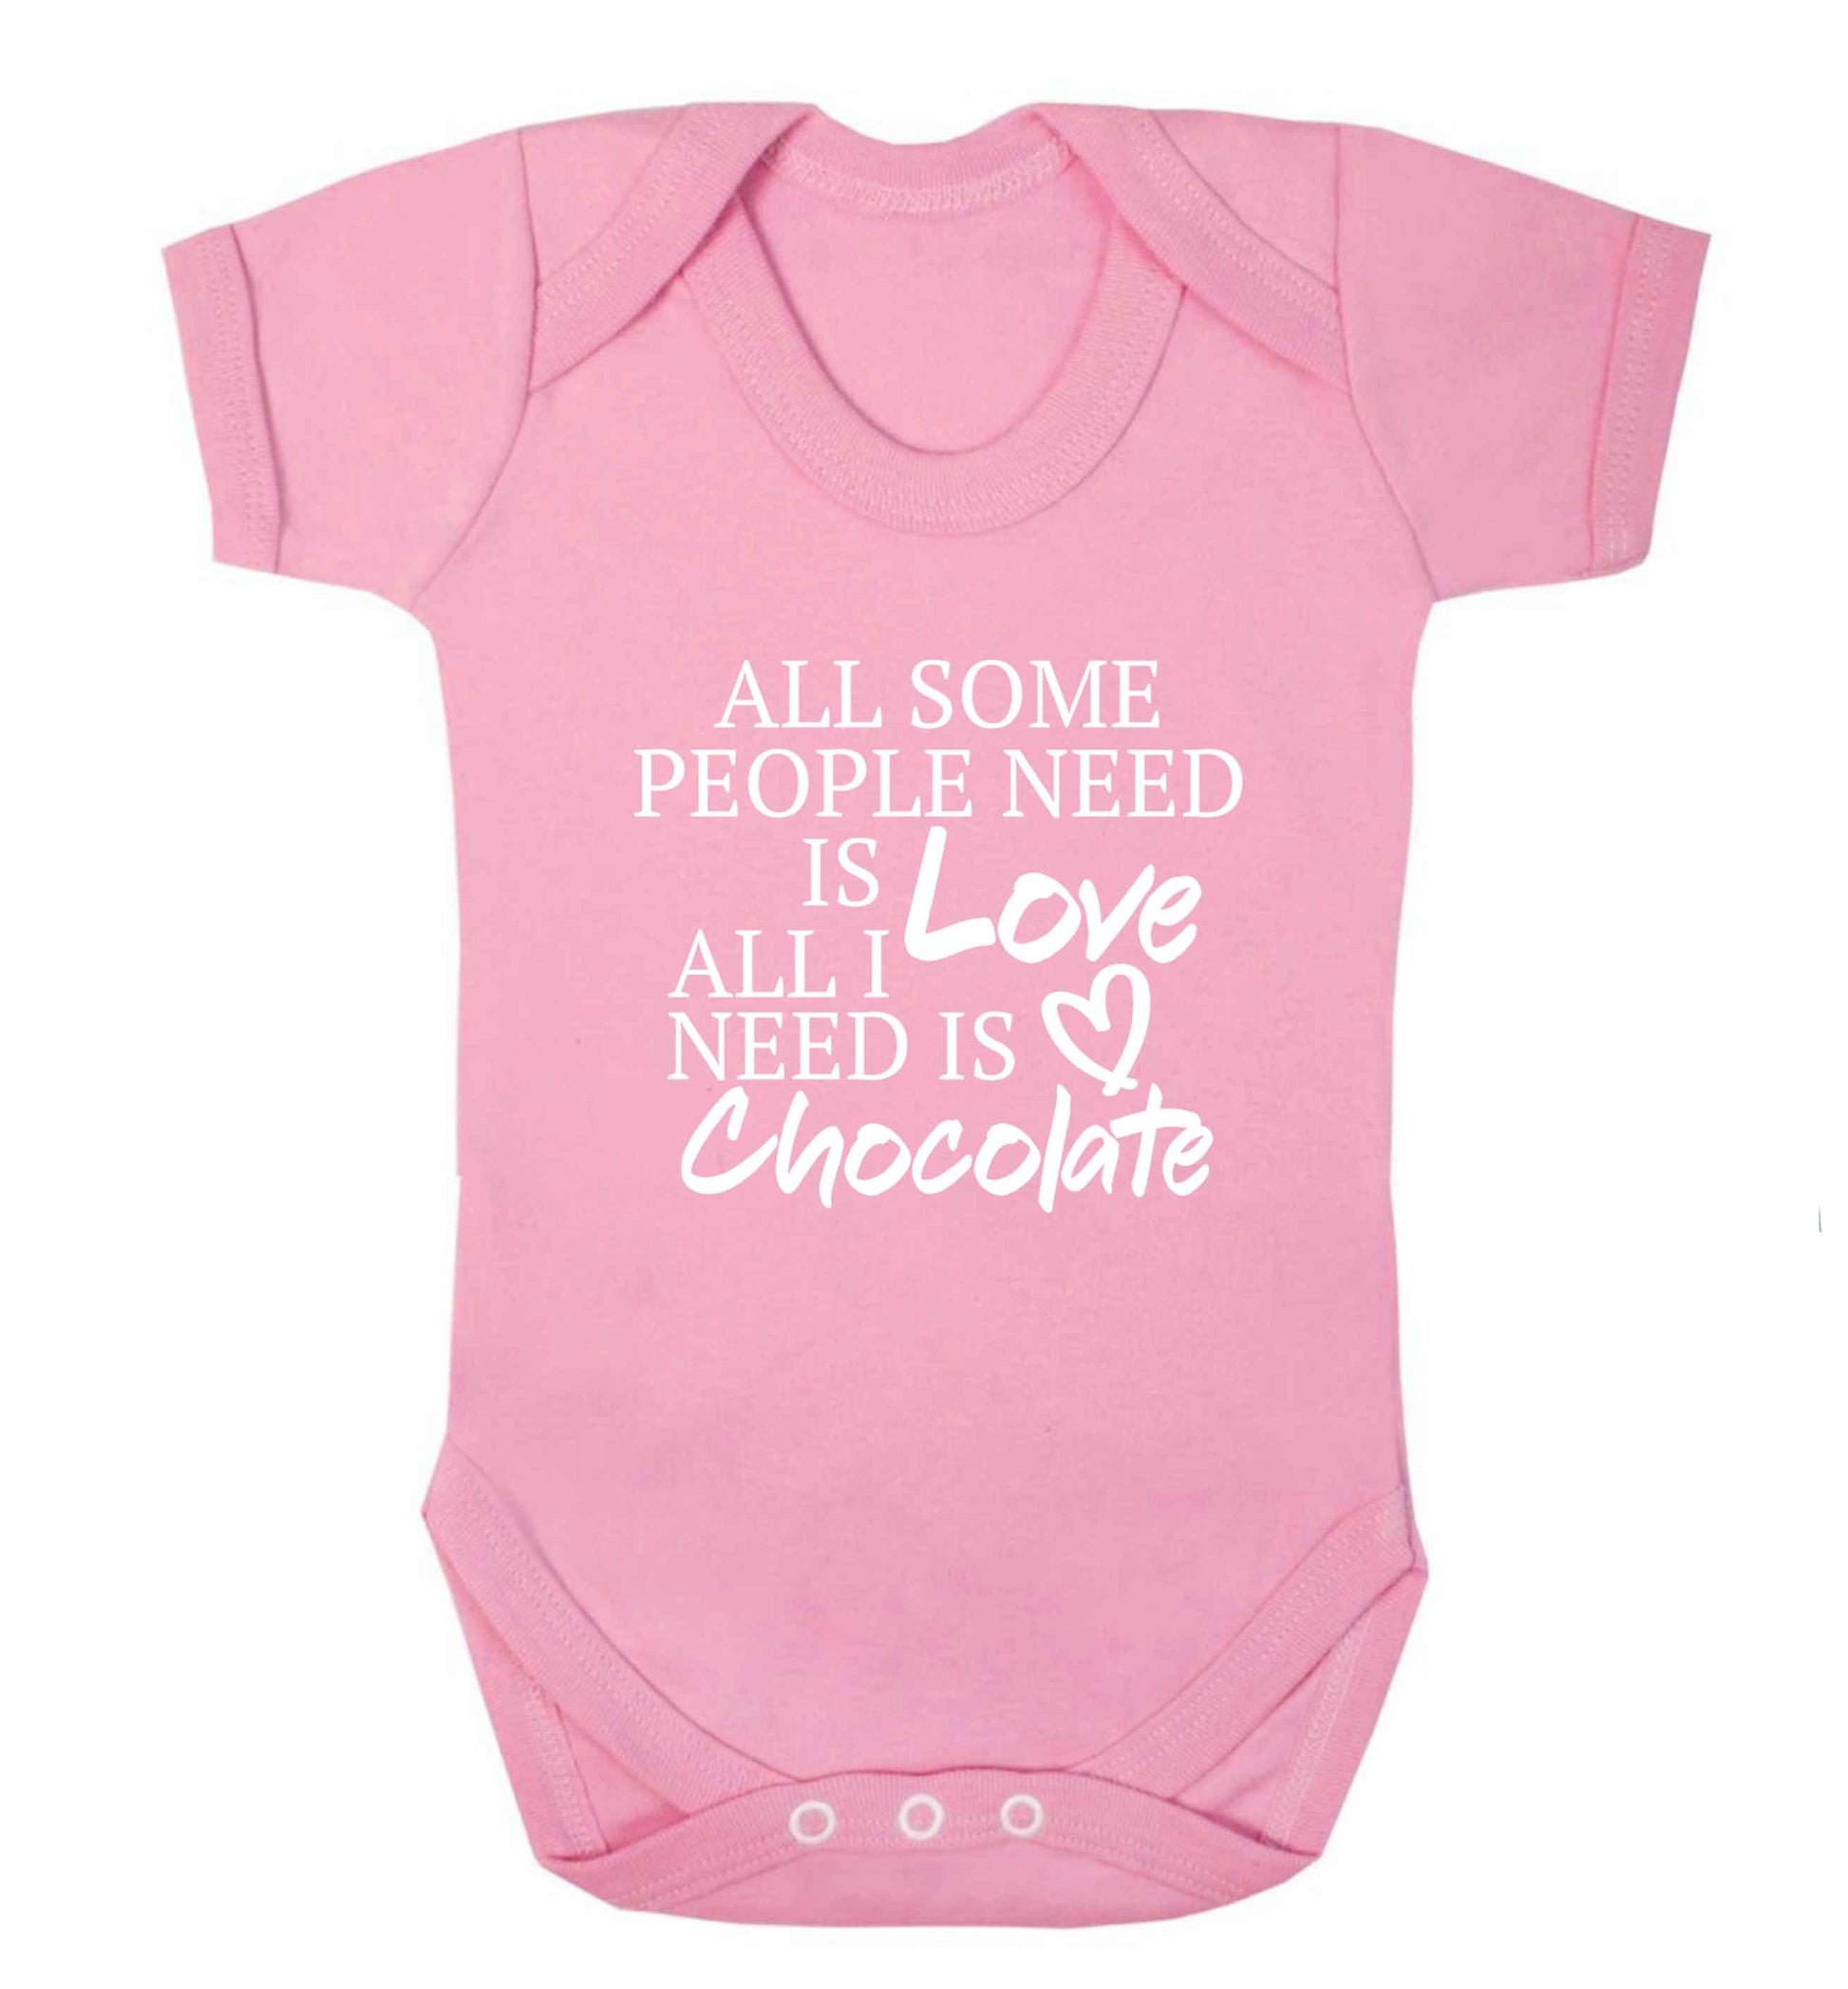 All some people need is love all I need is chocolate baby vest pale pink 18-24 months